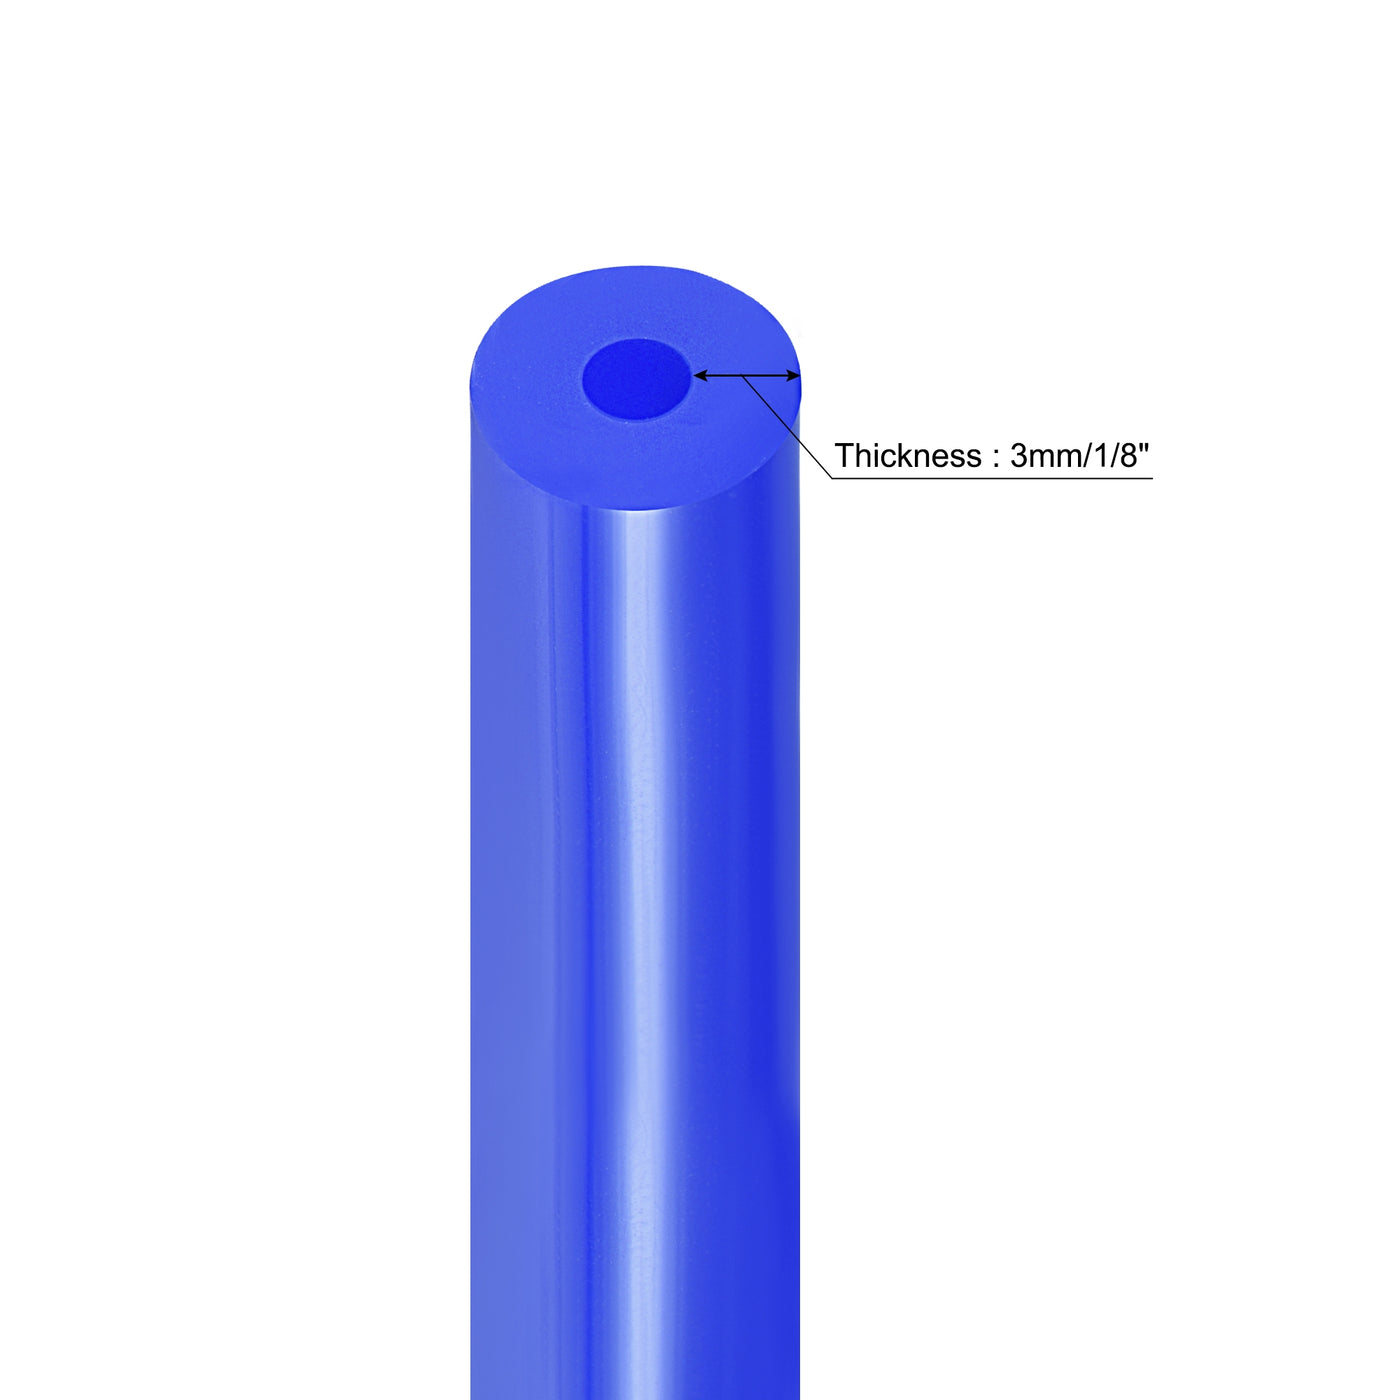 Harfington Vacuum Silicone Tubing Hose 1/8" 3/16" 1/4" 5/16" ID 1/8" Wall Thick 5ft Blue High Temperature for Engine